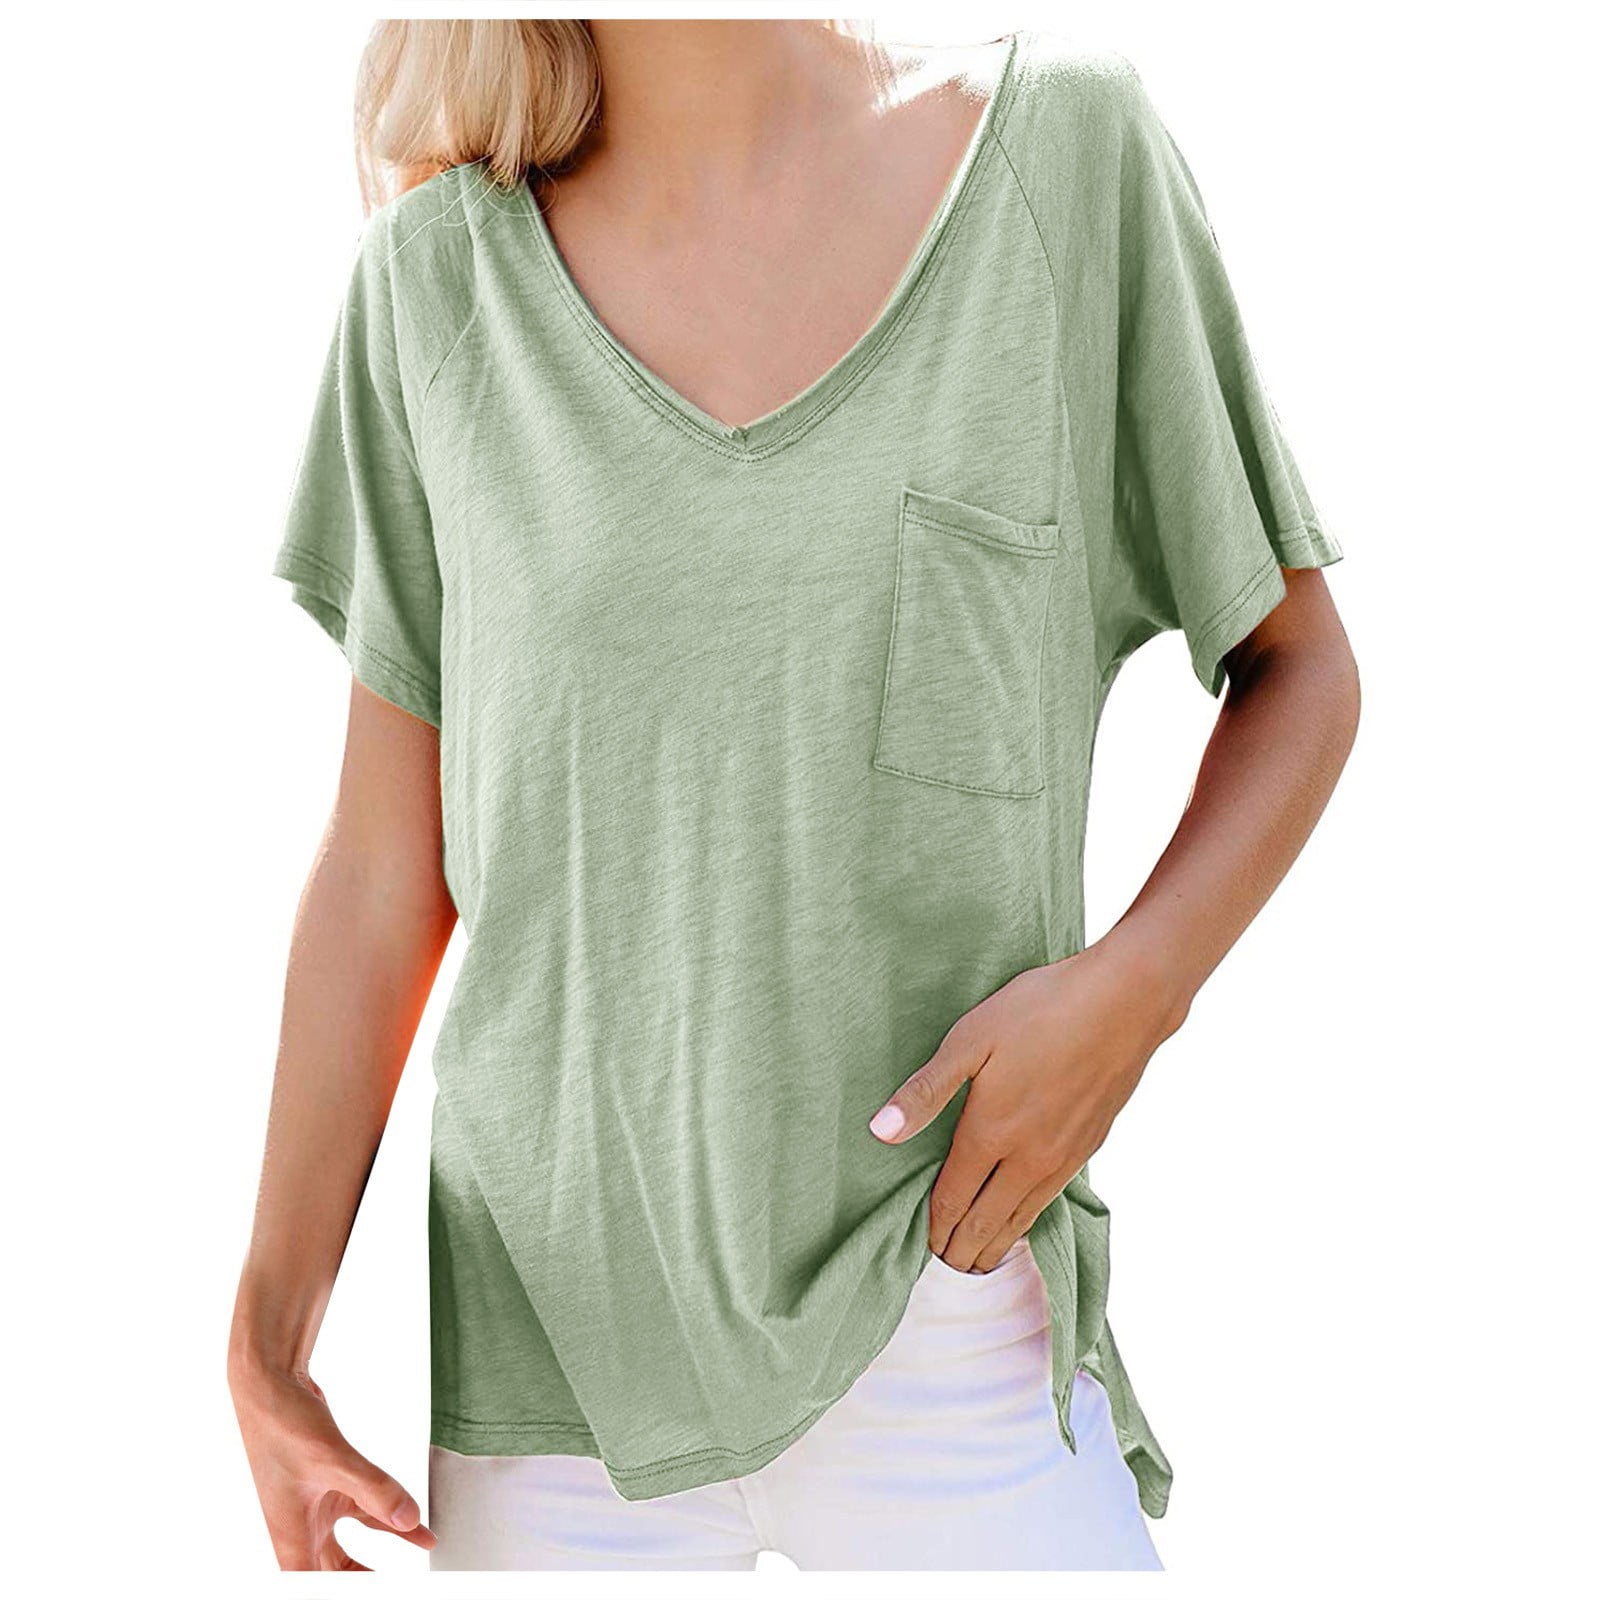 LBECLEY Cute Summer Tops Tops Women Color T-Shirt Loose Fashion Short-Sleeved  Solid V-Neck Pocket Women's T-Shirts Nice Tops for Women Polyester Green M  